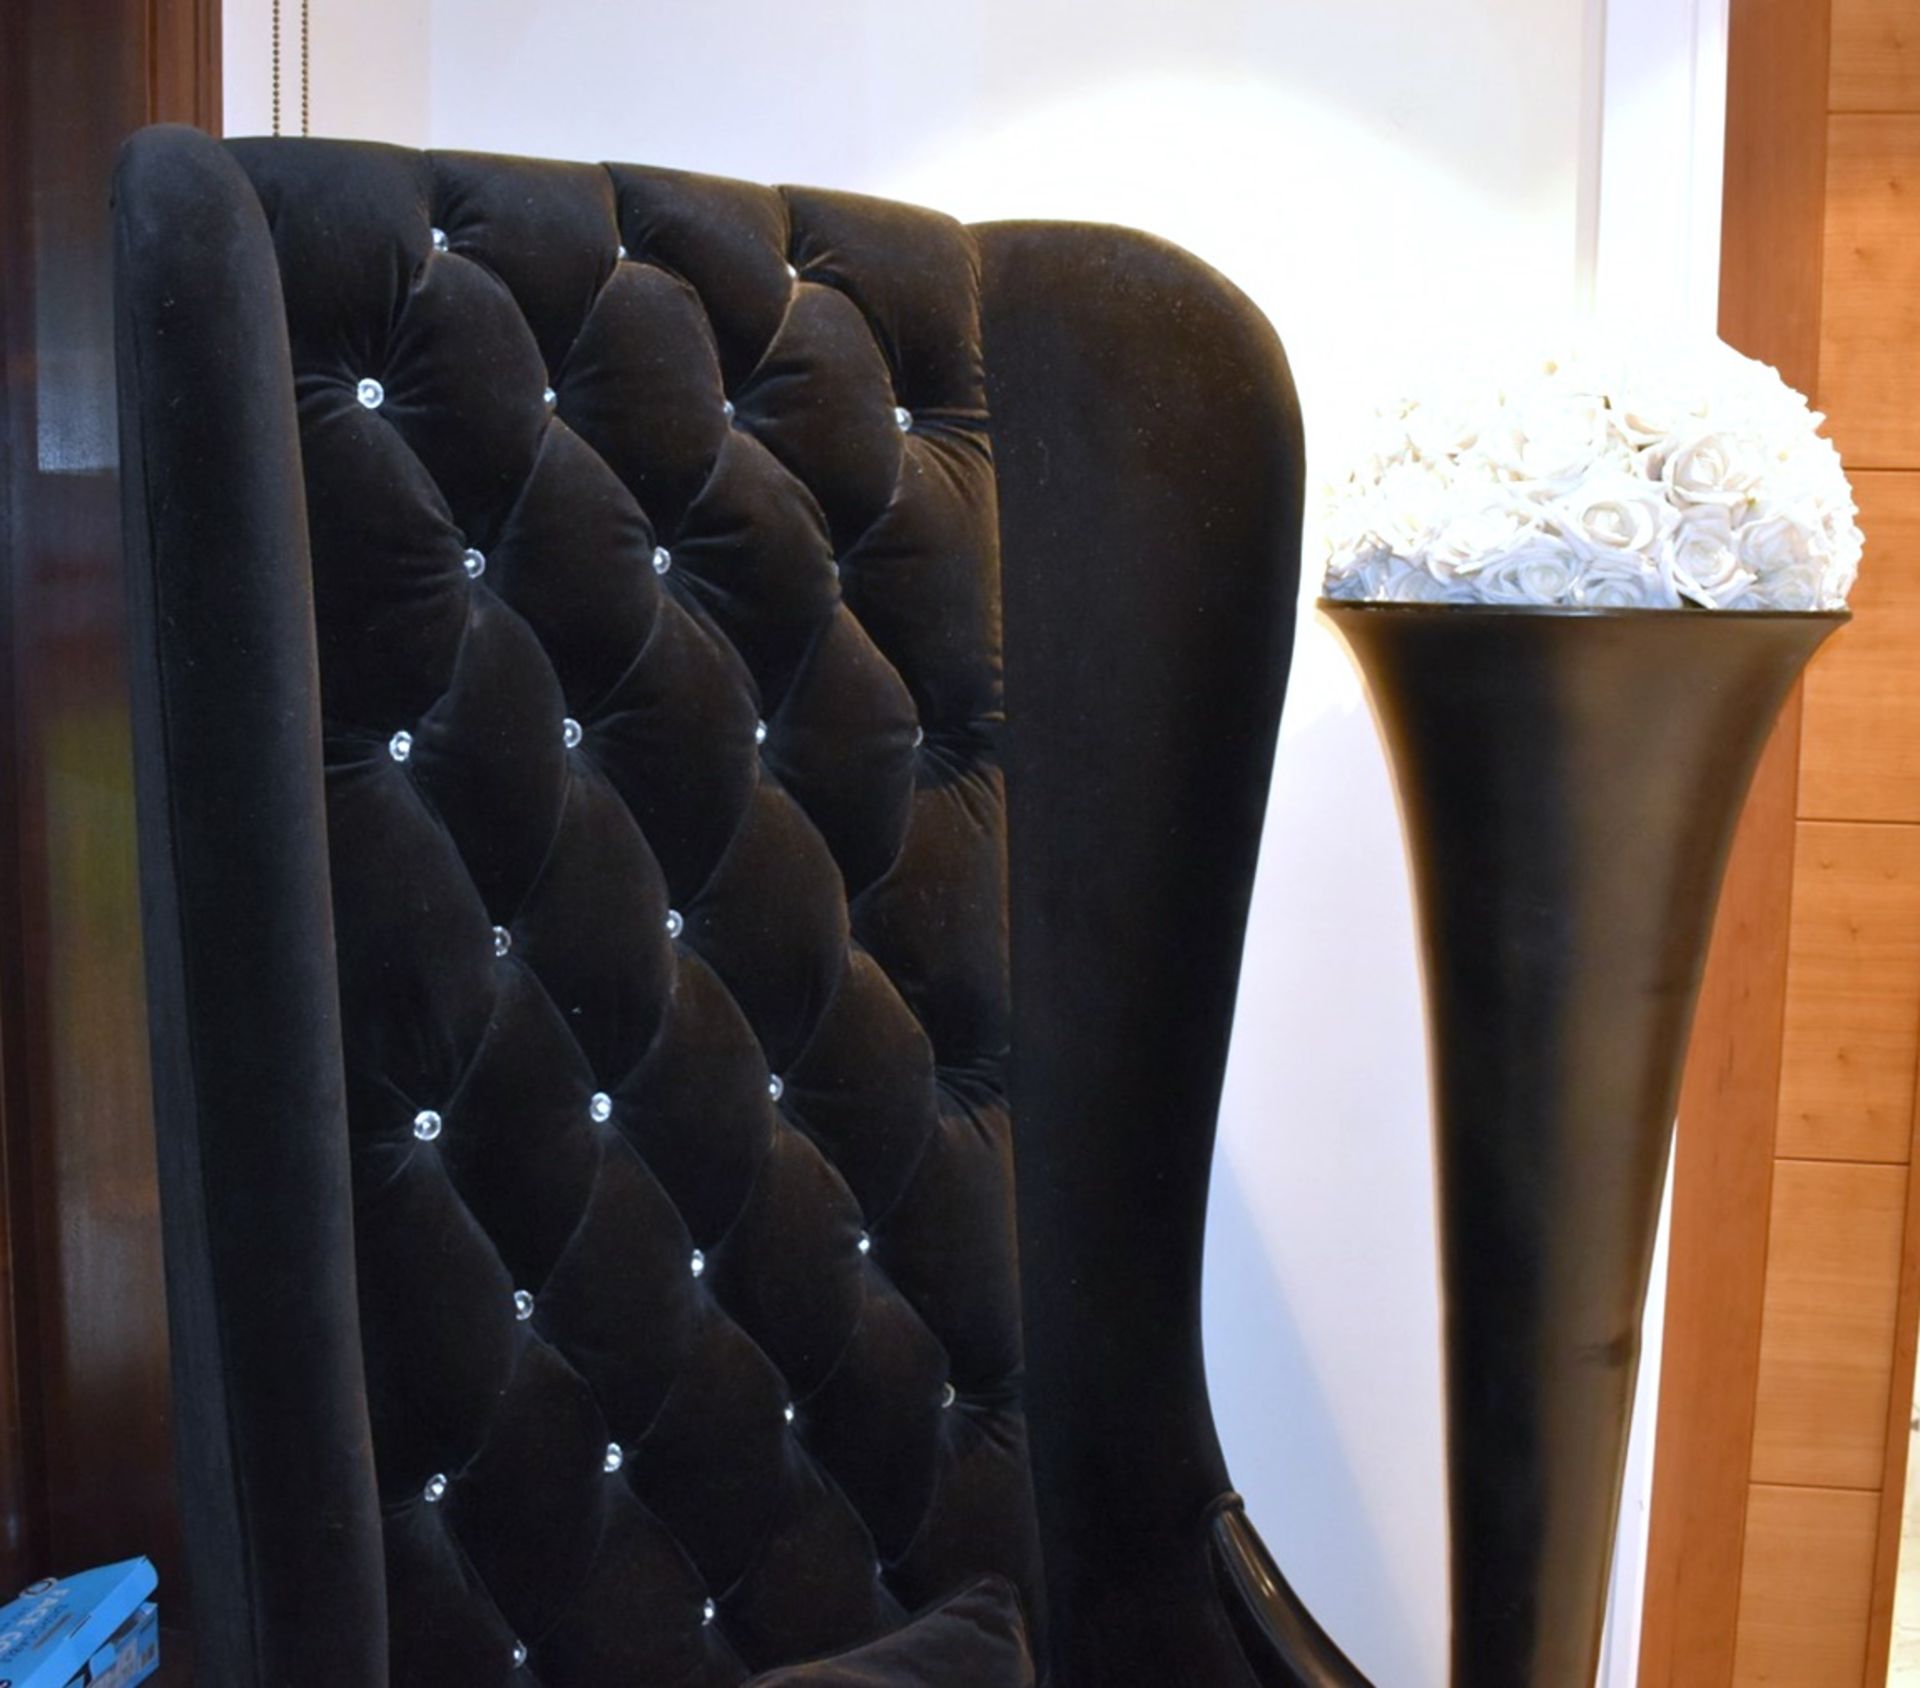 1 x Chesterfield Style Tall Wingback Armchair Upholstering in Black Velvet With Faux Crystal Studs - Image 5 of 7